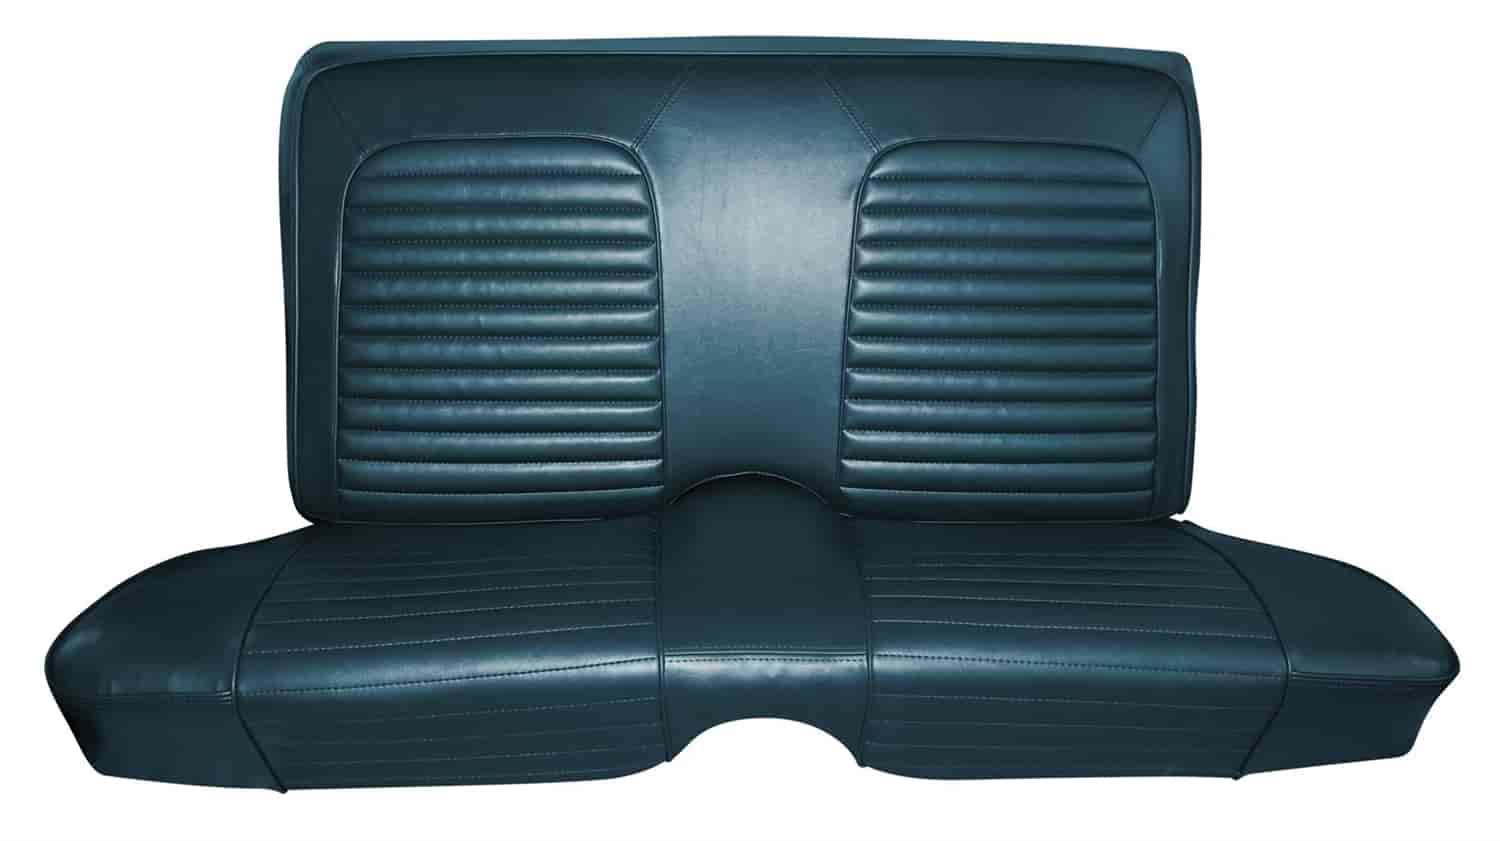 1963 Ford Falcon Futura Sport Hardtop Interior with Front Bucket Seats. Front and Rear Upholstery Set